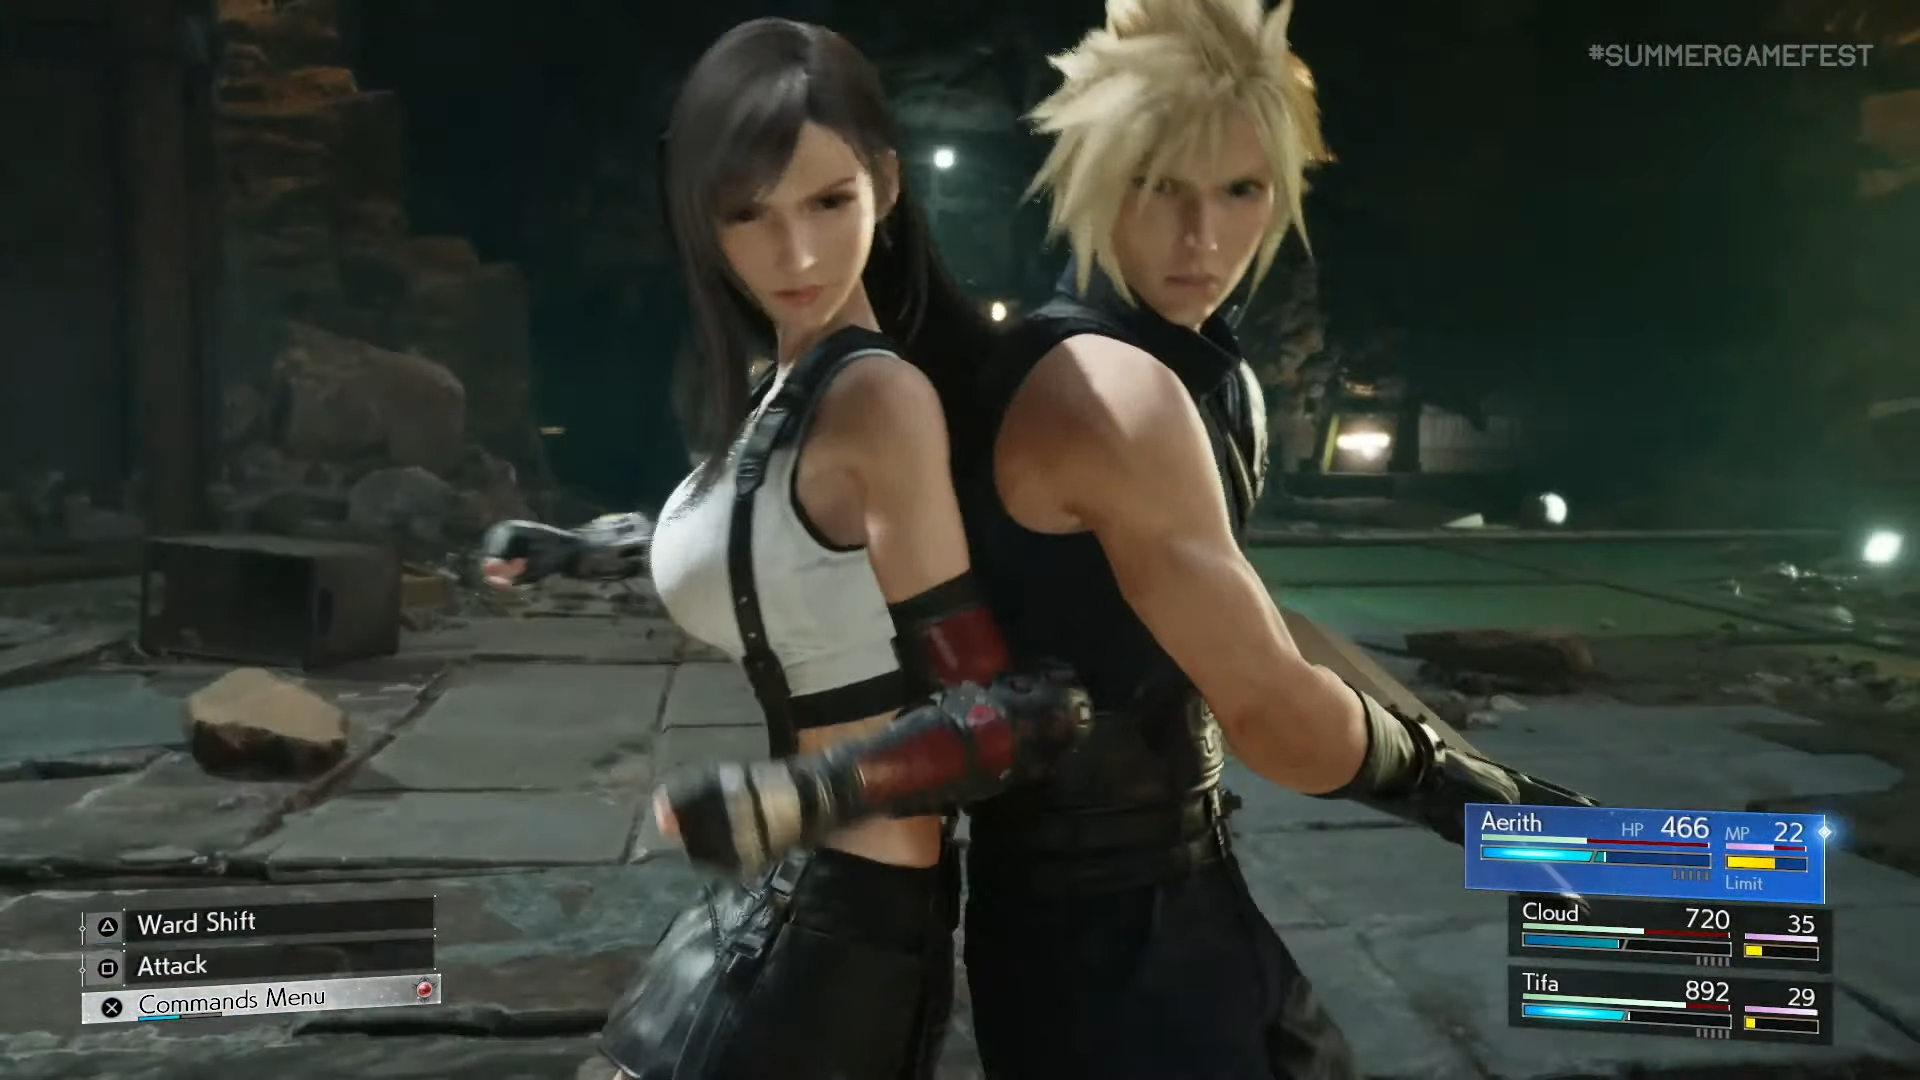 Cloud and Tifa stand back-to-back in a fight.